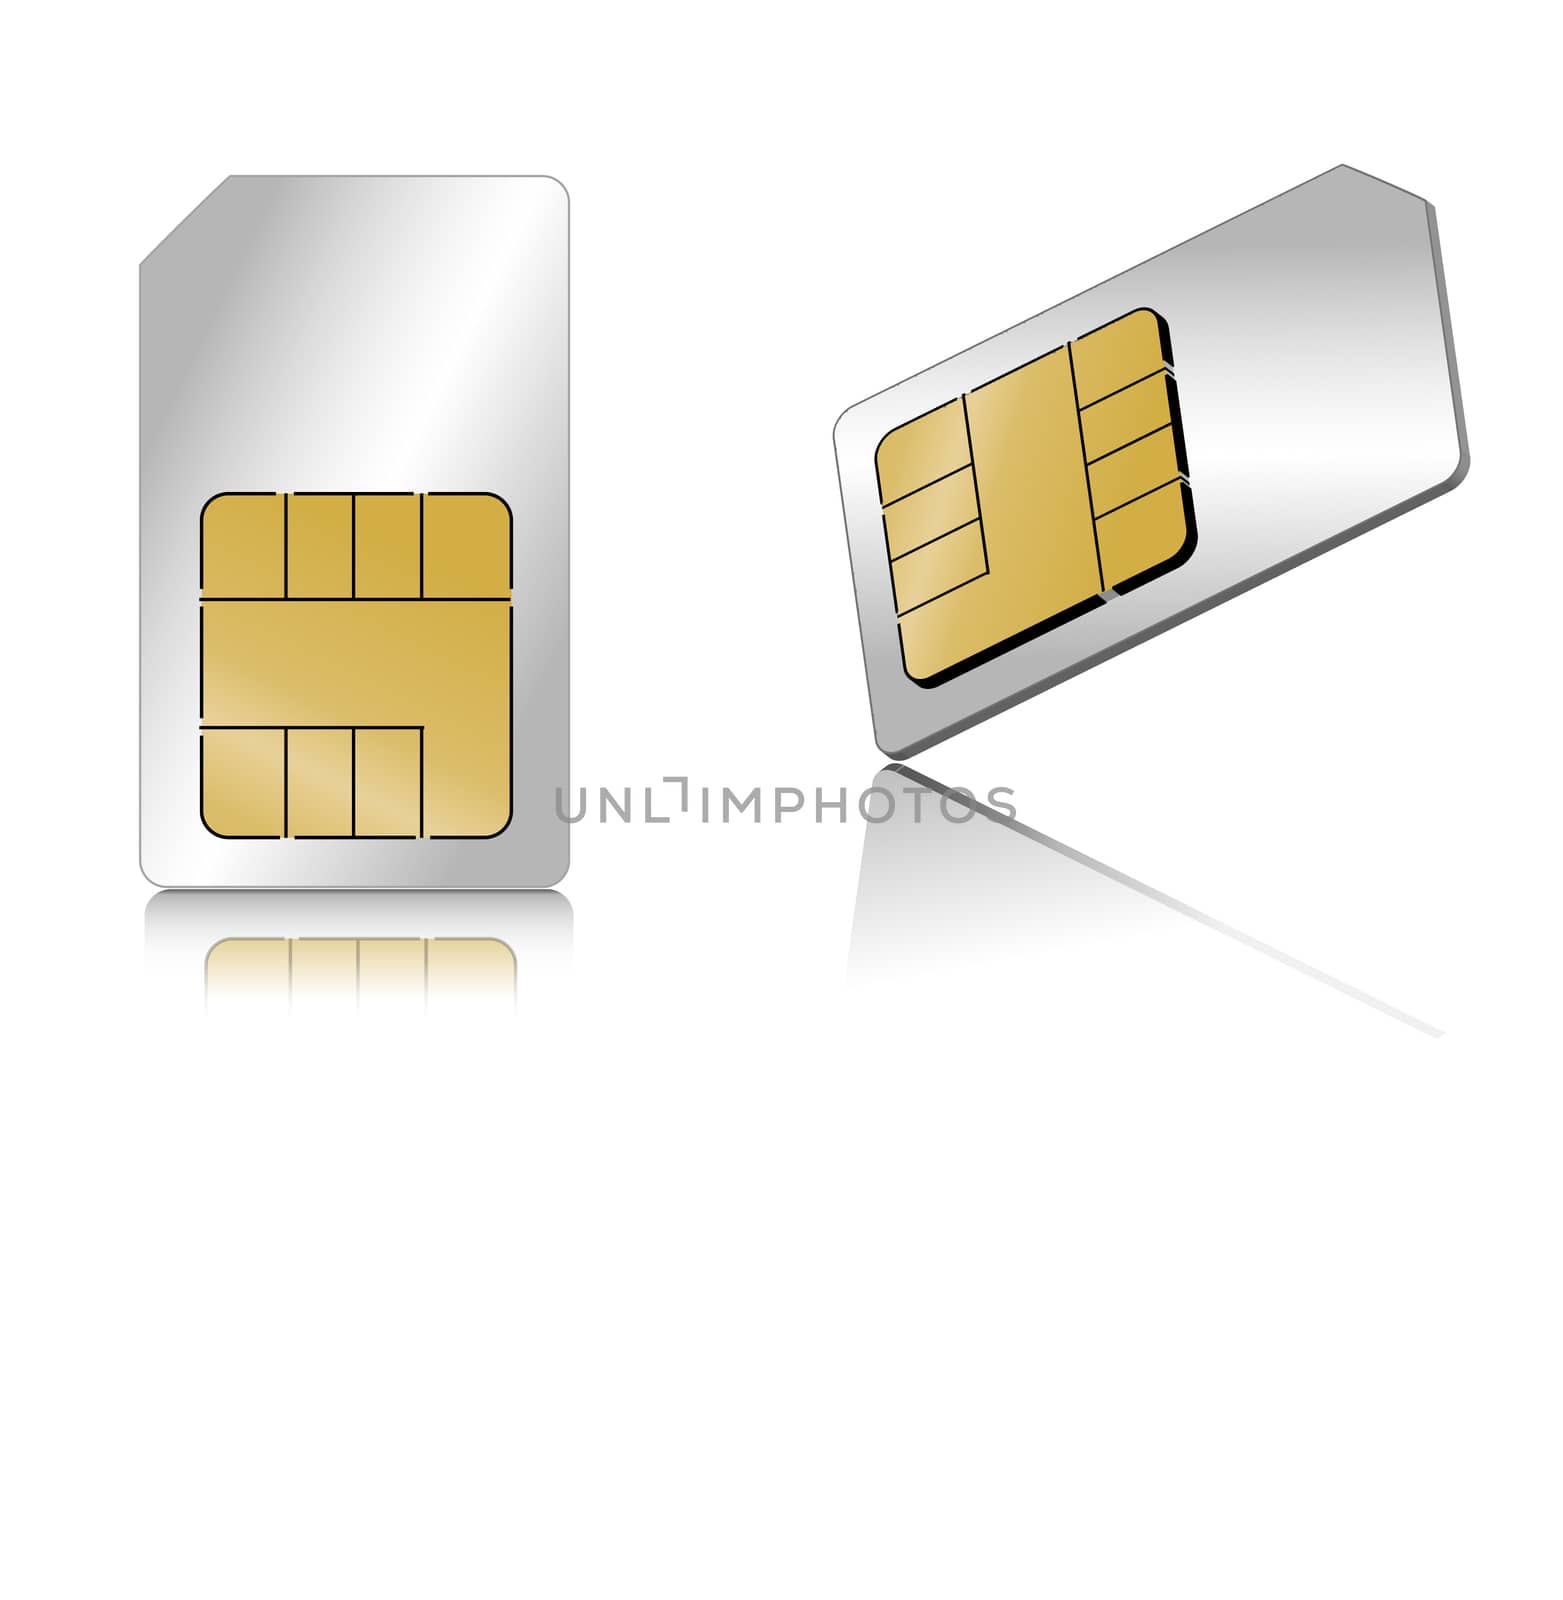 SIM card in different view angles by alexmillos